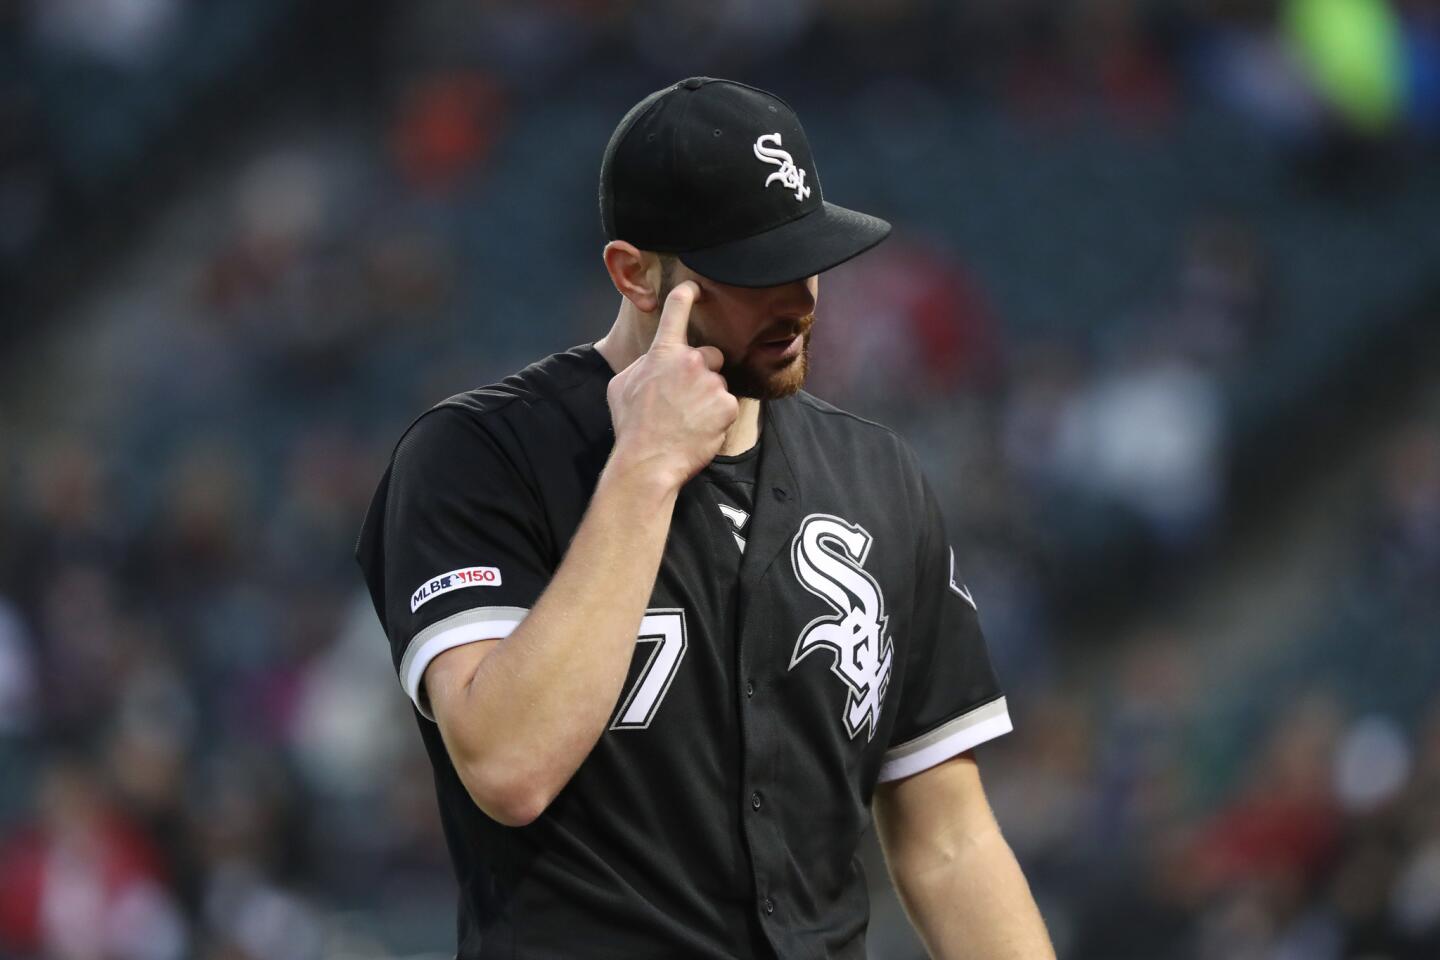 White Sox pitcher Lucas Giolito heads to the dugout after throwing in the first inning against the Red Sox on May 2, 2019, at Guaranteed Rate Field.